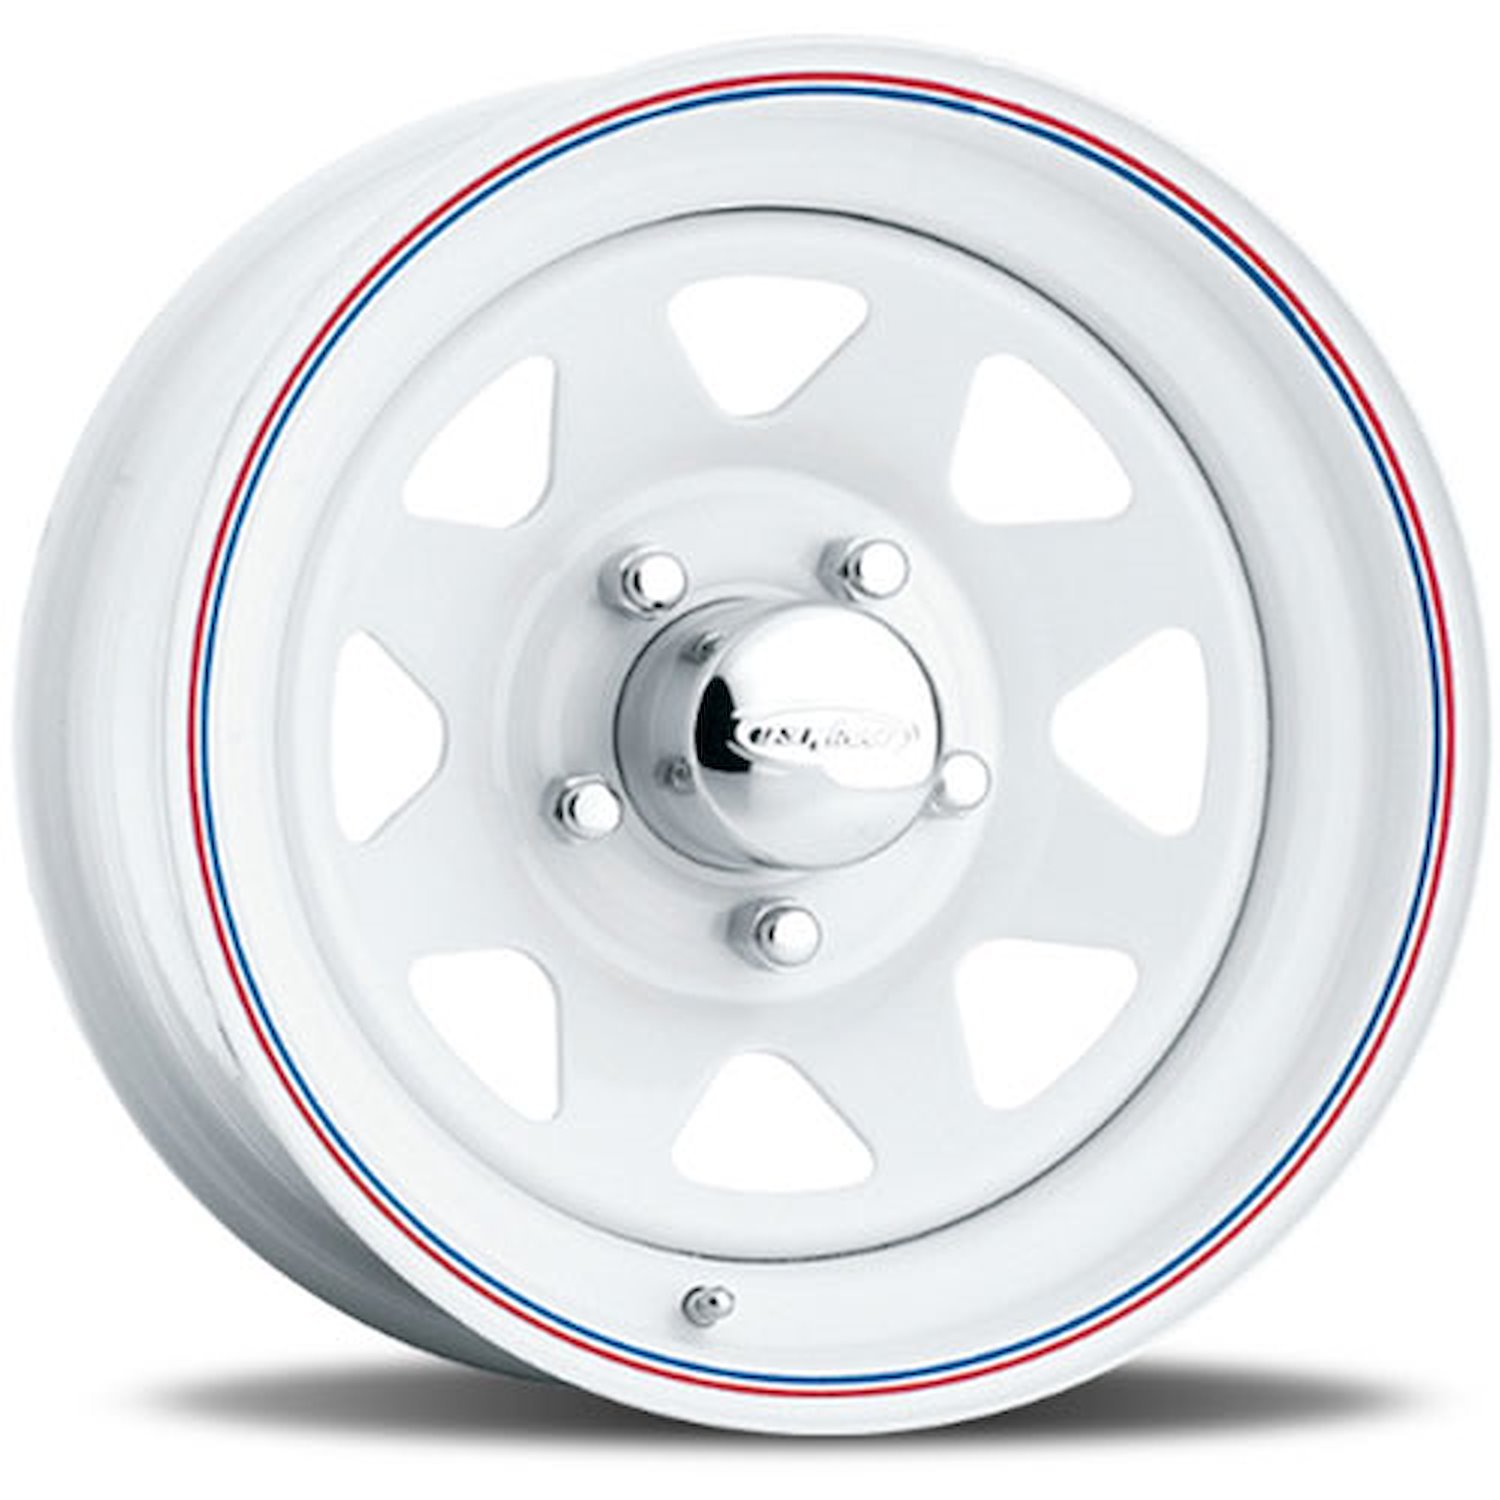 WHITE 8SPOKE 15 x 7 6 x 55 Bolt Circle 45 Back Spacing +13 offset 428 Center Bore 1600 lbs Load Rating